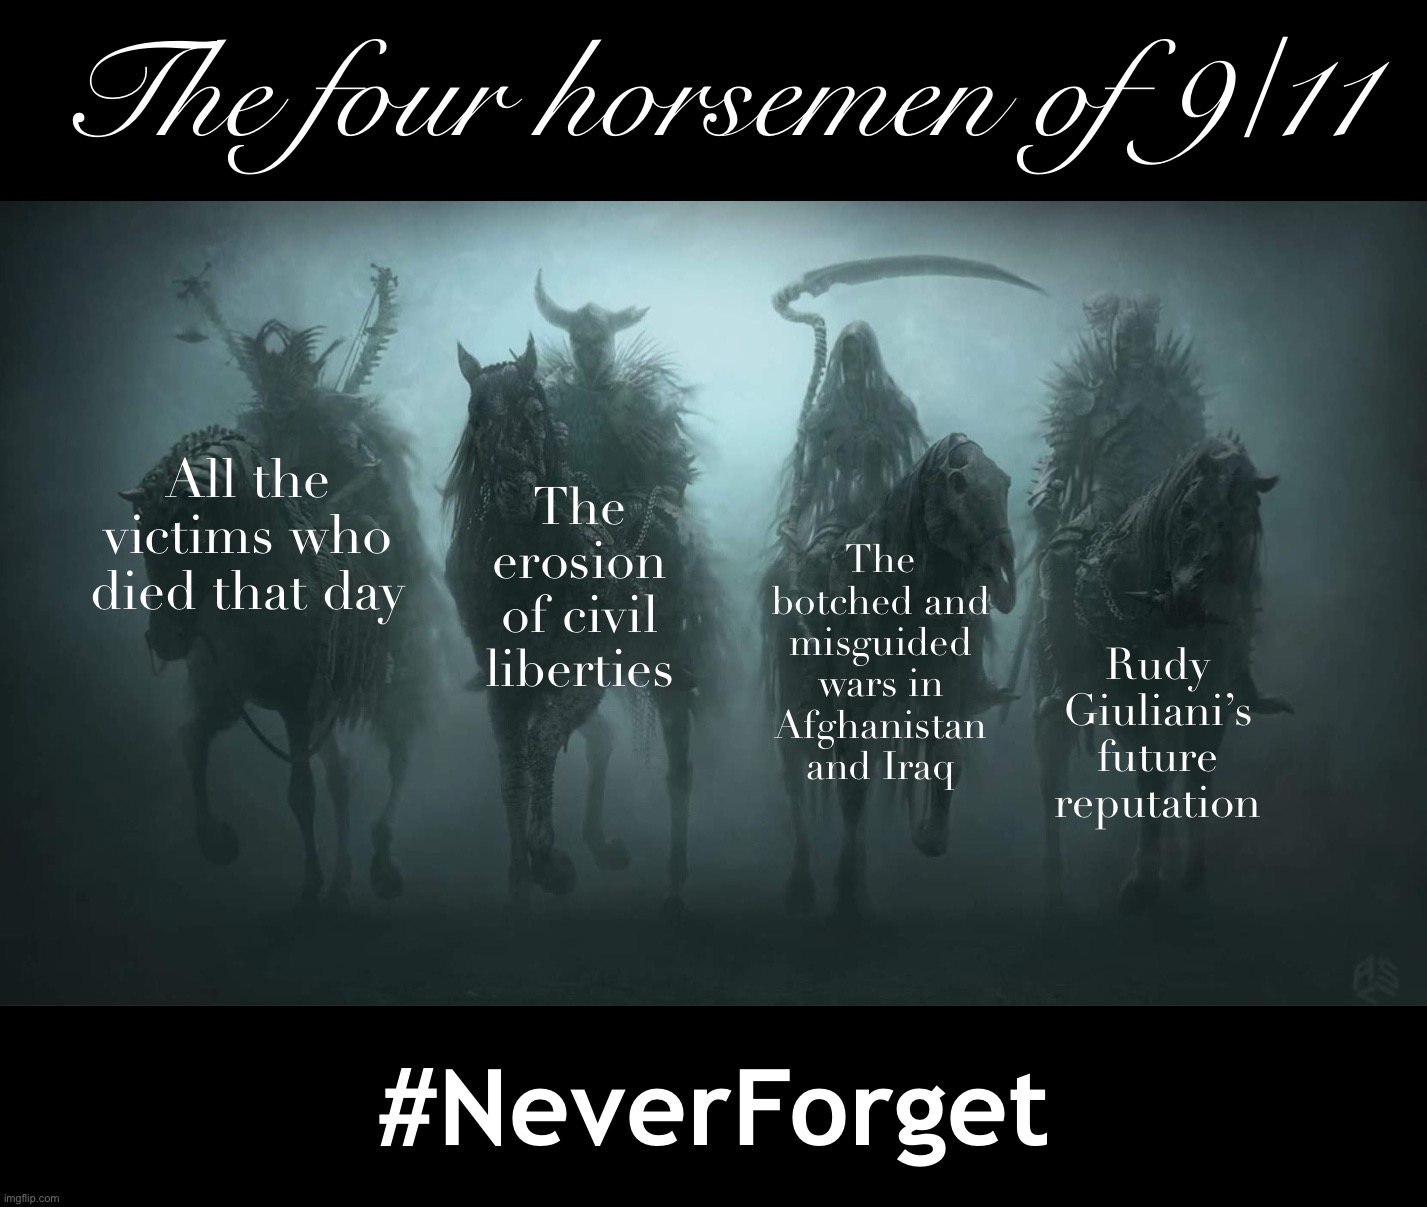 — Four casualties of 9/11 — | The four horsemen of 9/11; All the victims who died that day; The erosion of civil liberties; The botched and misguided wars in Afghanistan and Iraq; Rudy Giuliani’s future reputation; #NeverForget | image tagged in four horsemen fixed textboxes,9/11,iraq,afghanistan,rudy giuliani,politics | made w/ Imgflip meme maker